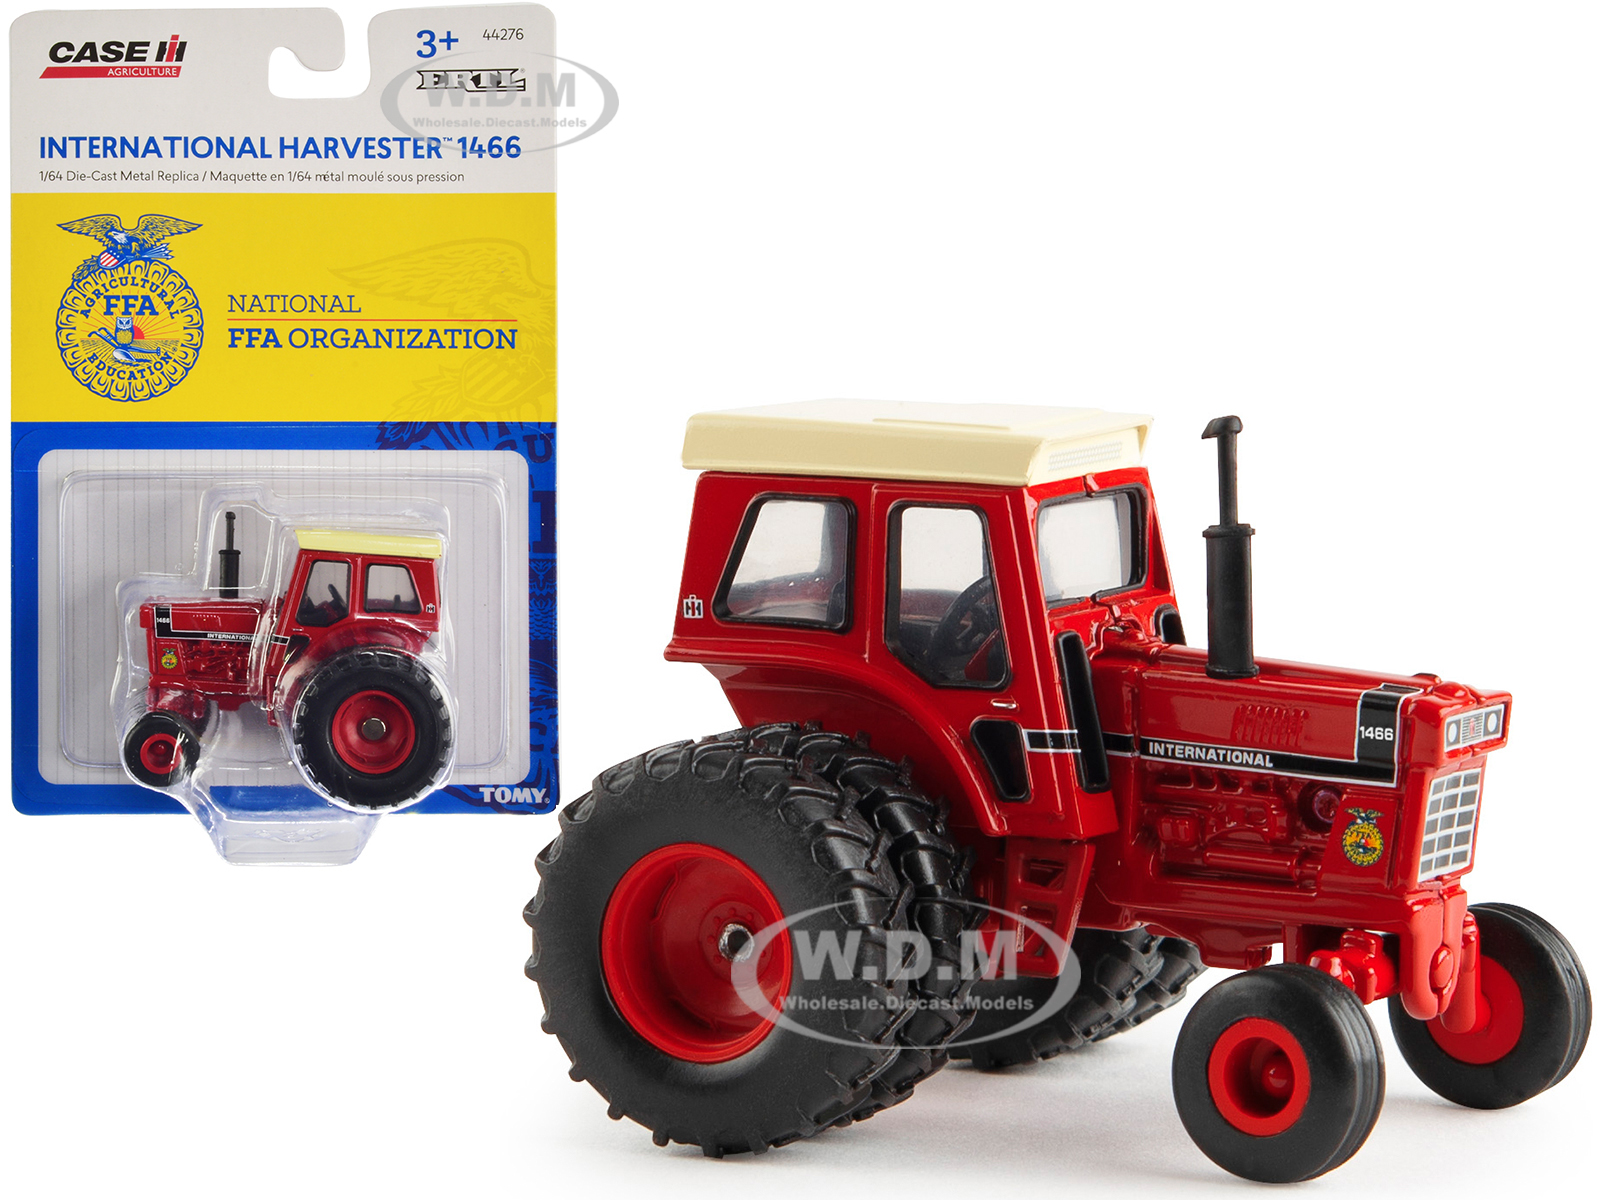 IH International Harvester 1466 Tractor with Dual Wheels Red "National FFA Organization" "Case IH Agriculture" 1/64 Diecast Model by ERTL TOMY